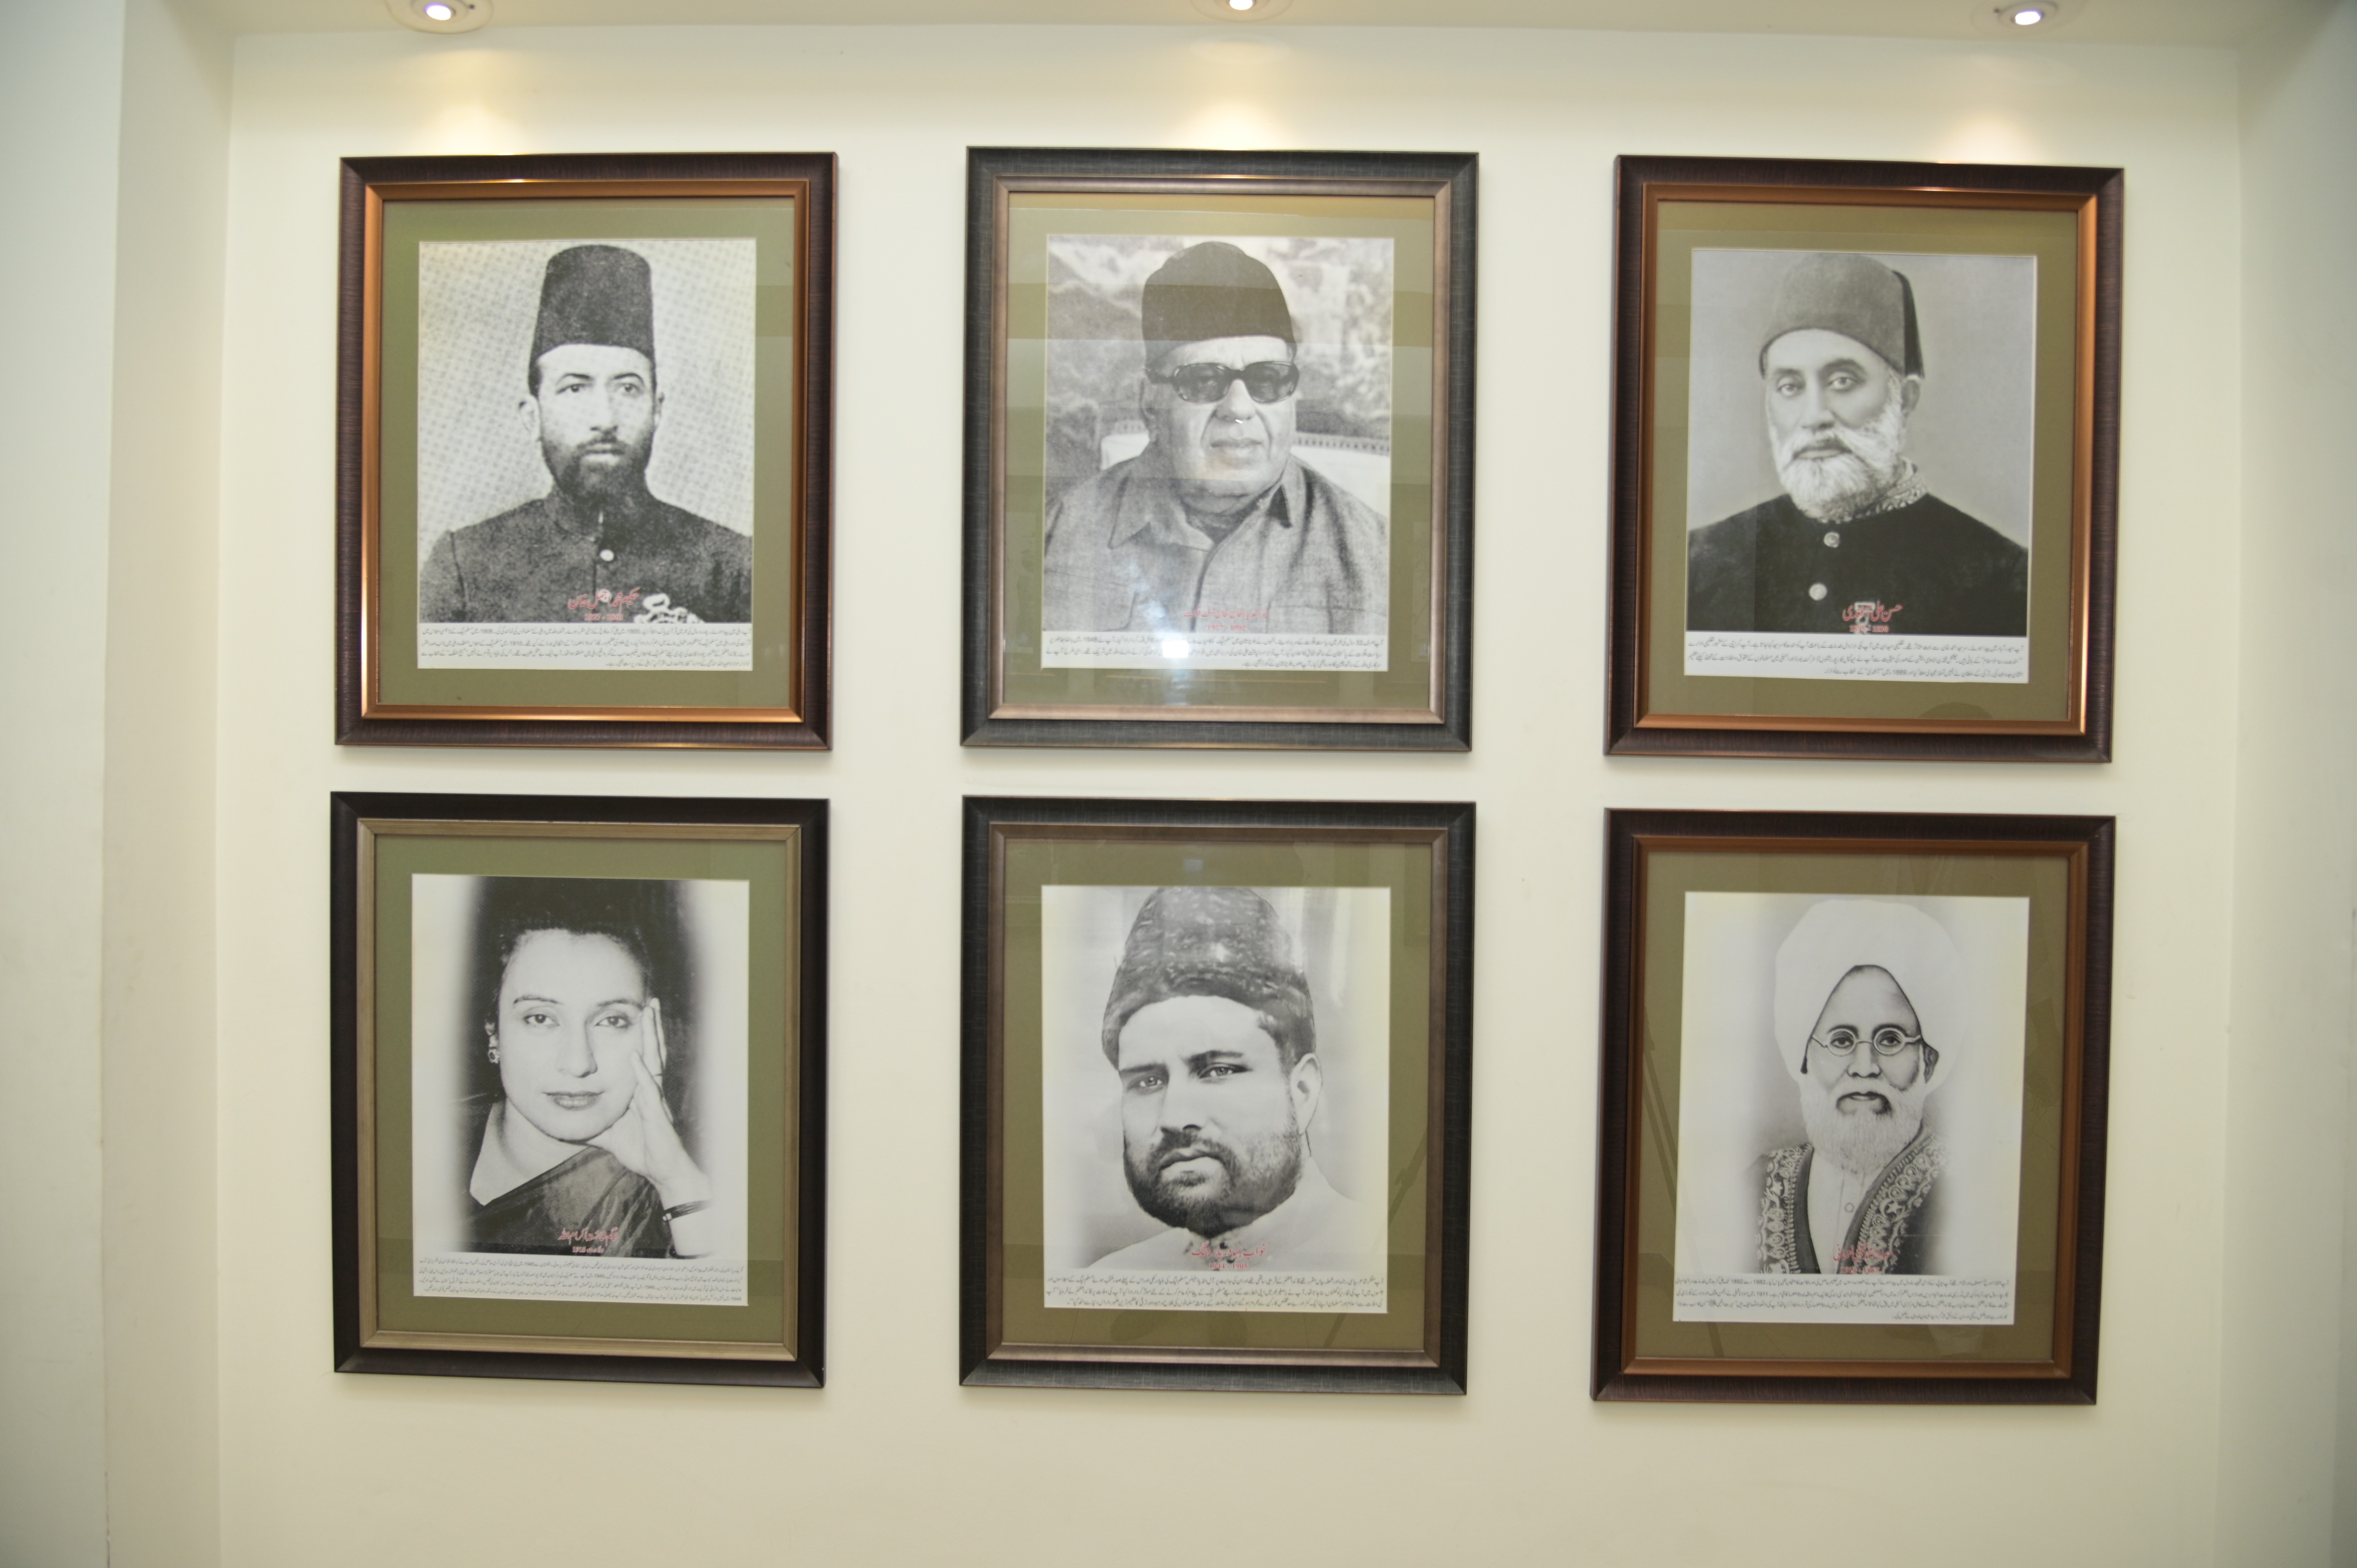 The photos of renowned laureates of the 17th century in subcontinent